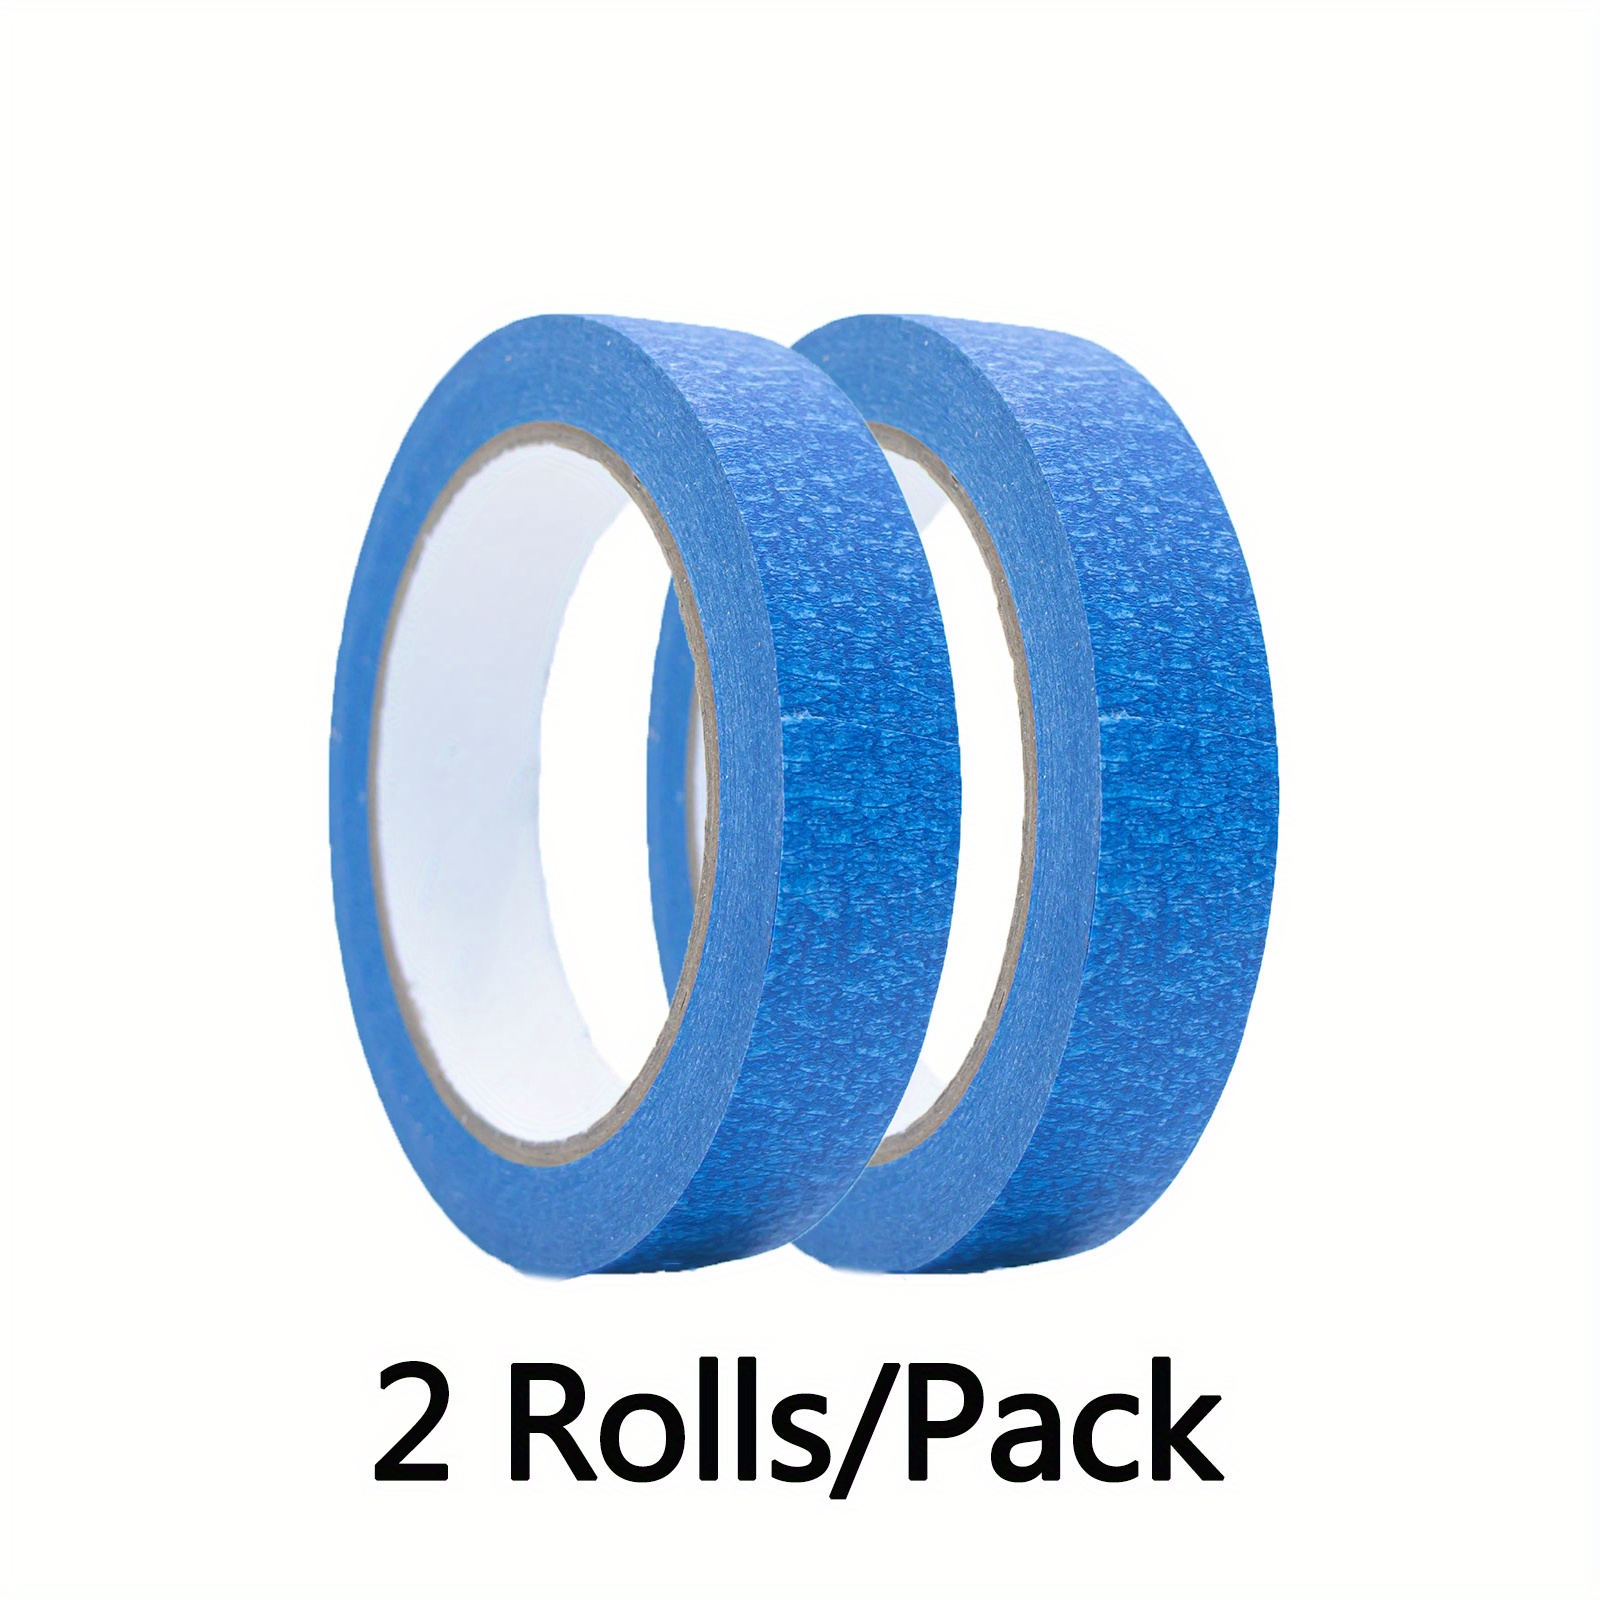 Wide Blue Painters Tape, 12 inch x 60 Yards, 3D Printing Tape, Easy Clean Removal Up to 21 Days, Masking Tape